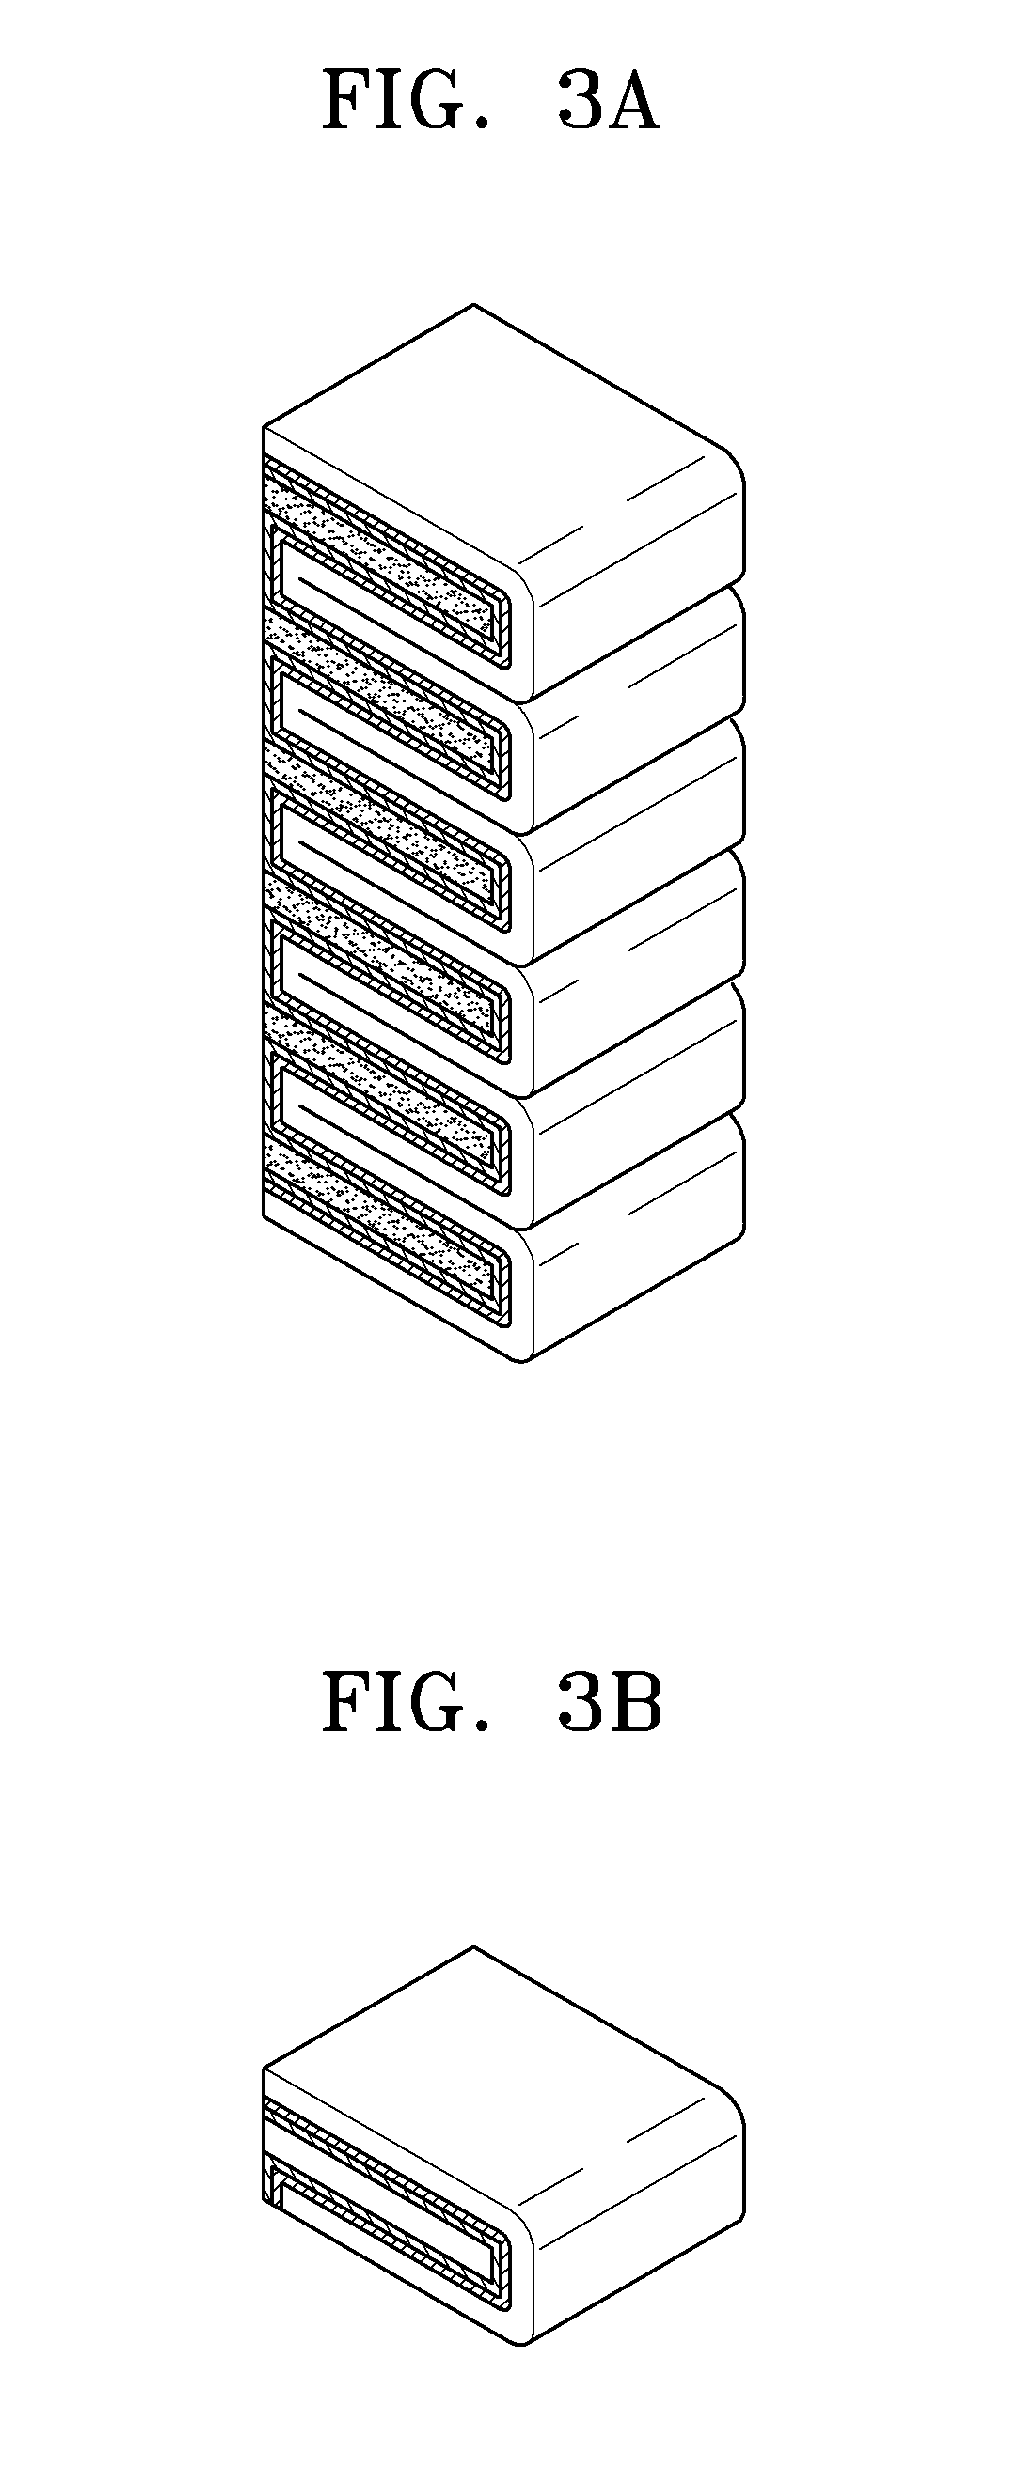 Metal-air battery having folded structure and method of manufacturing the same